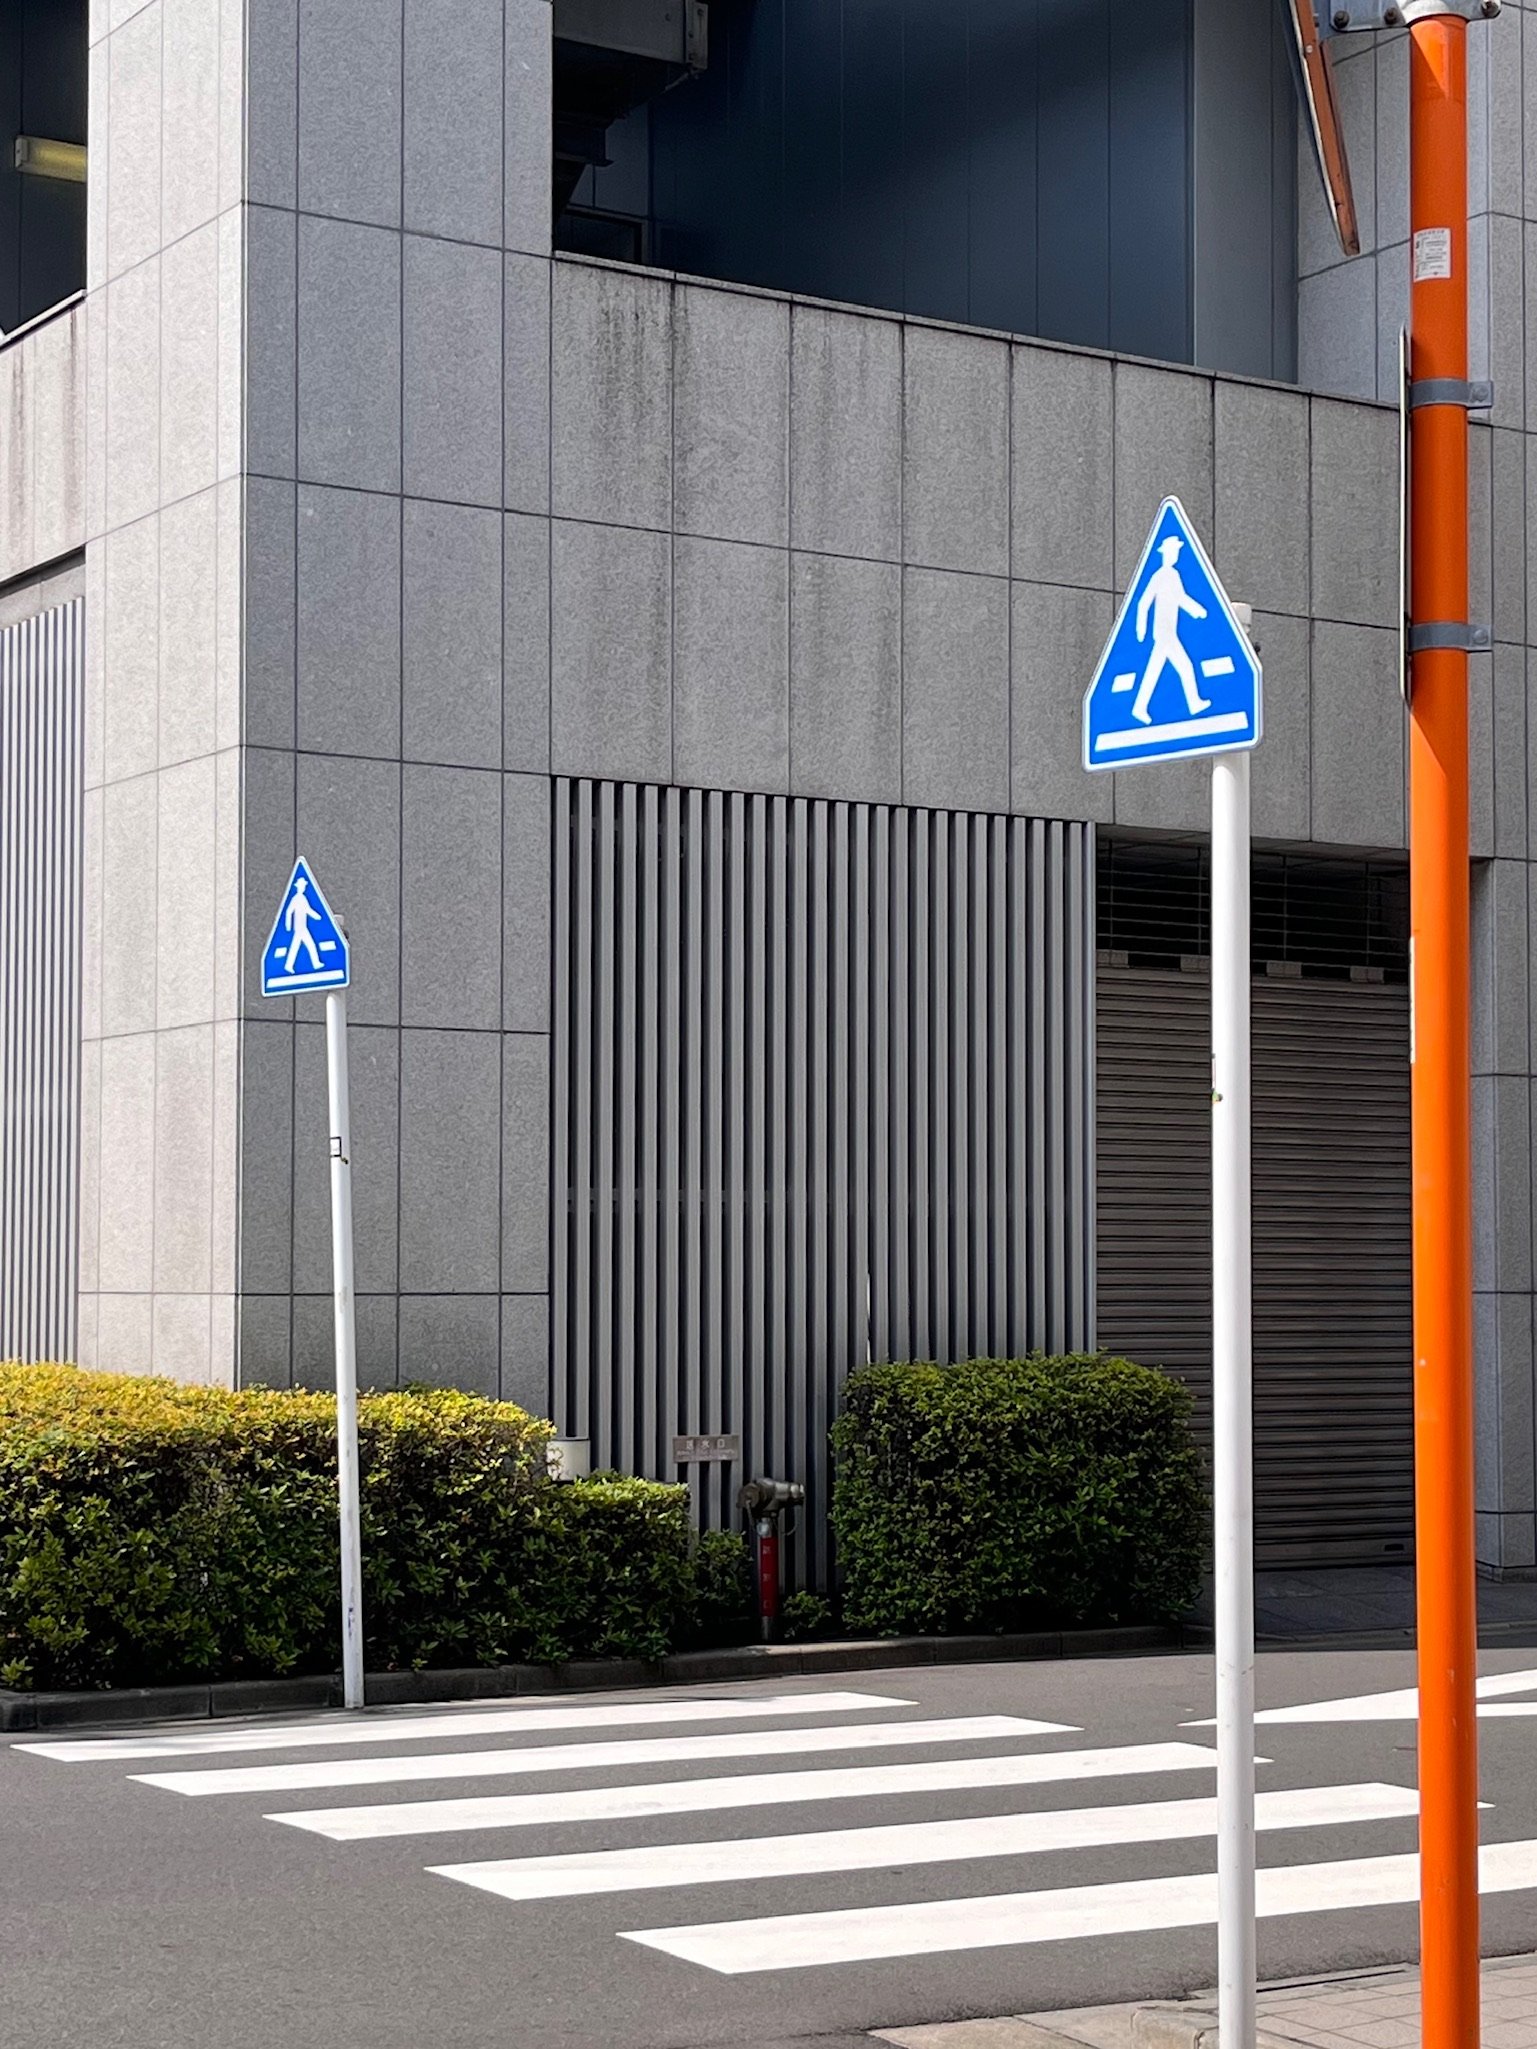 Pedestrian cross and signs.